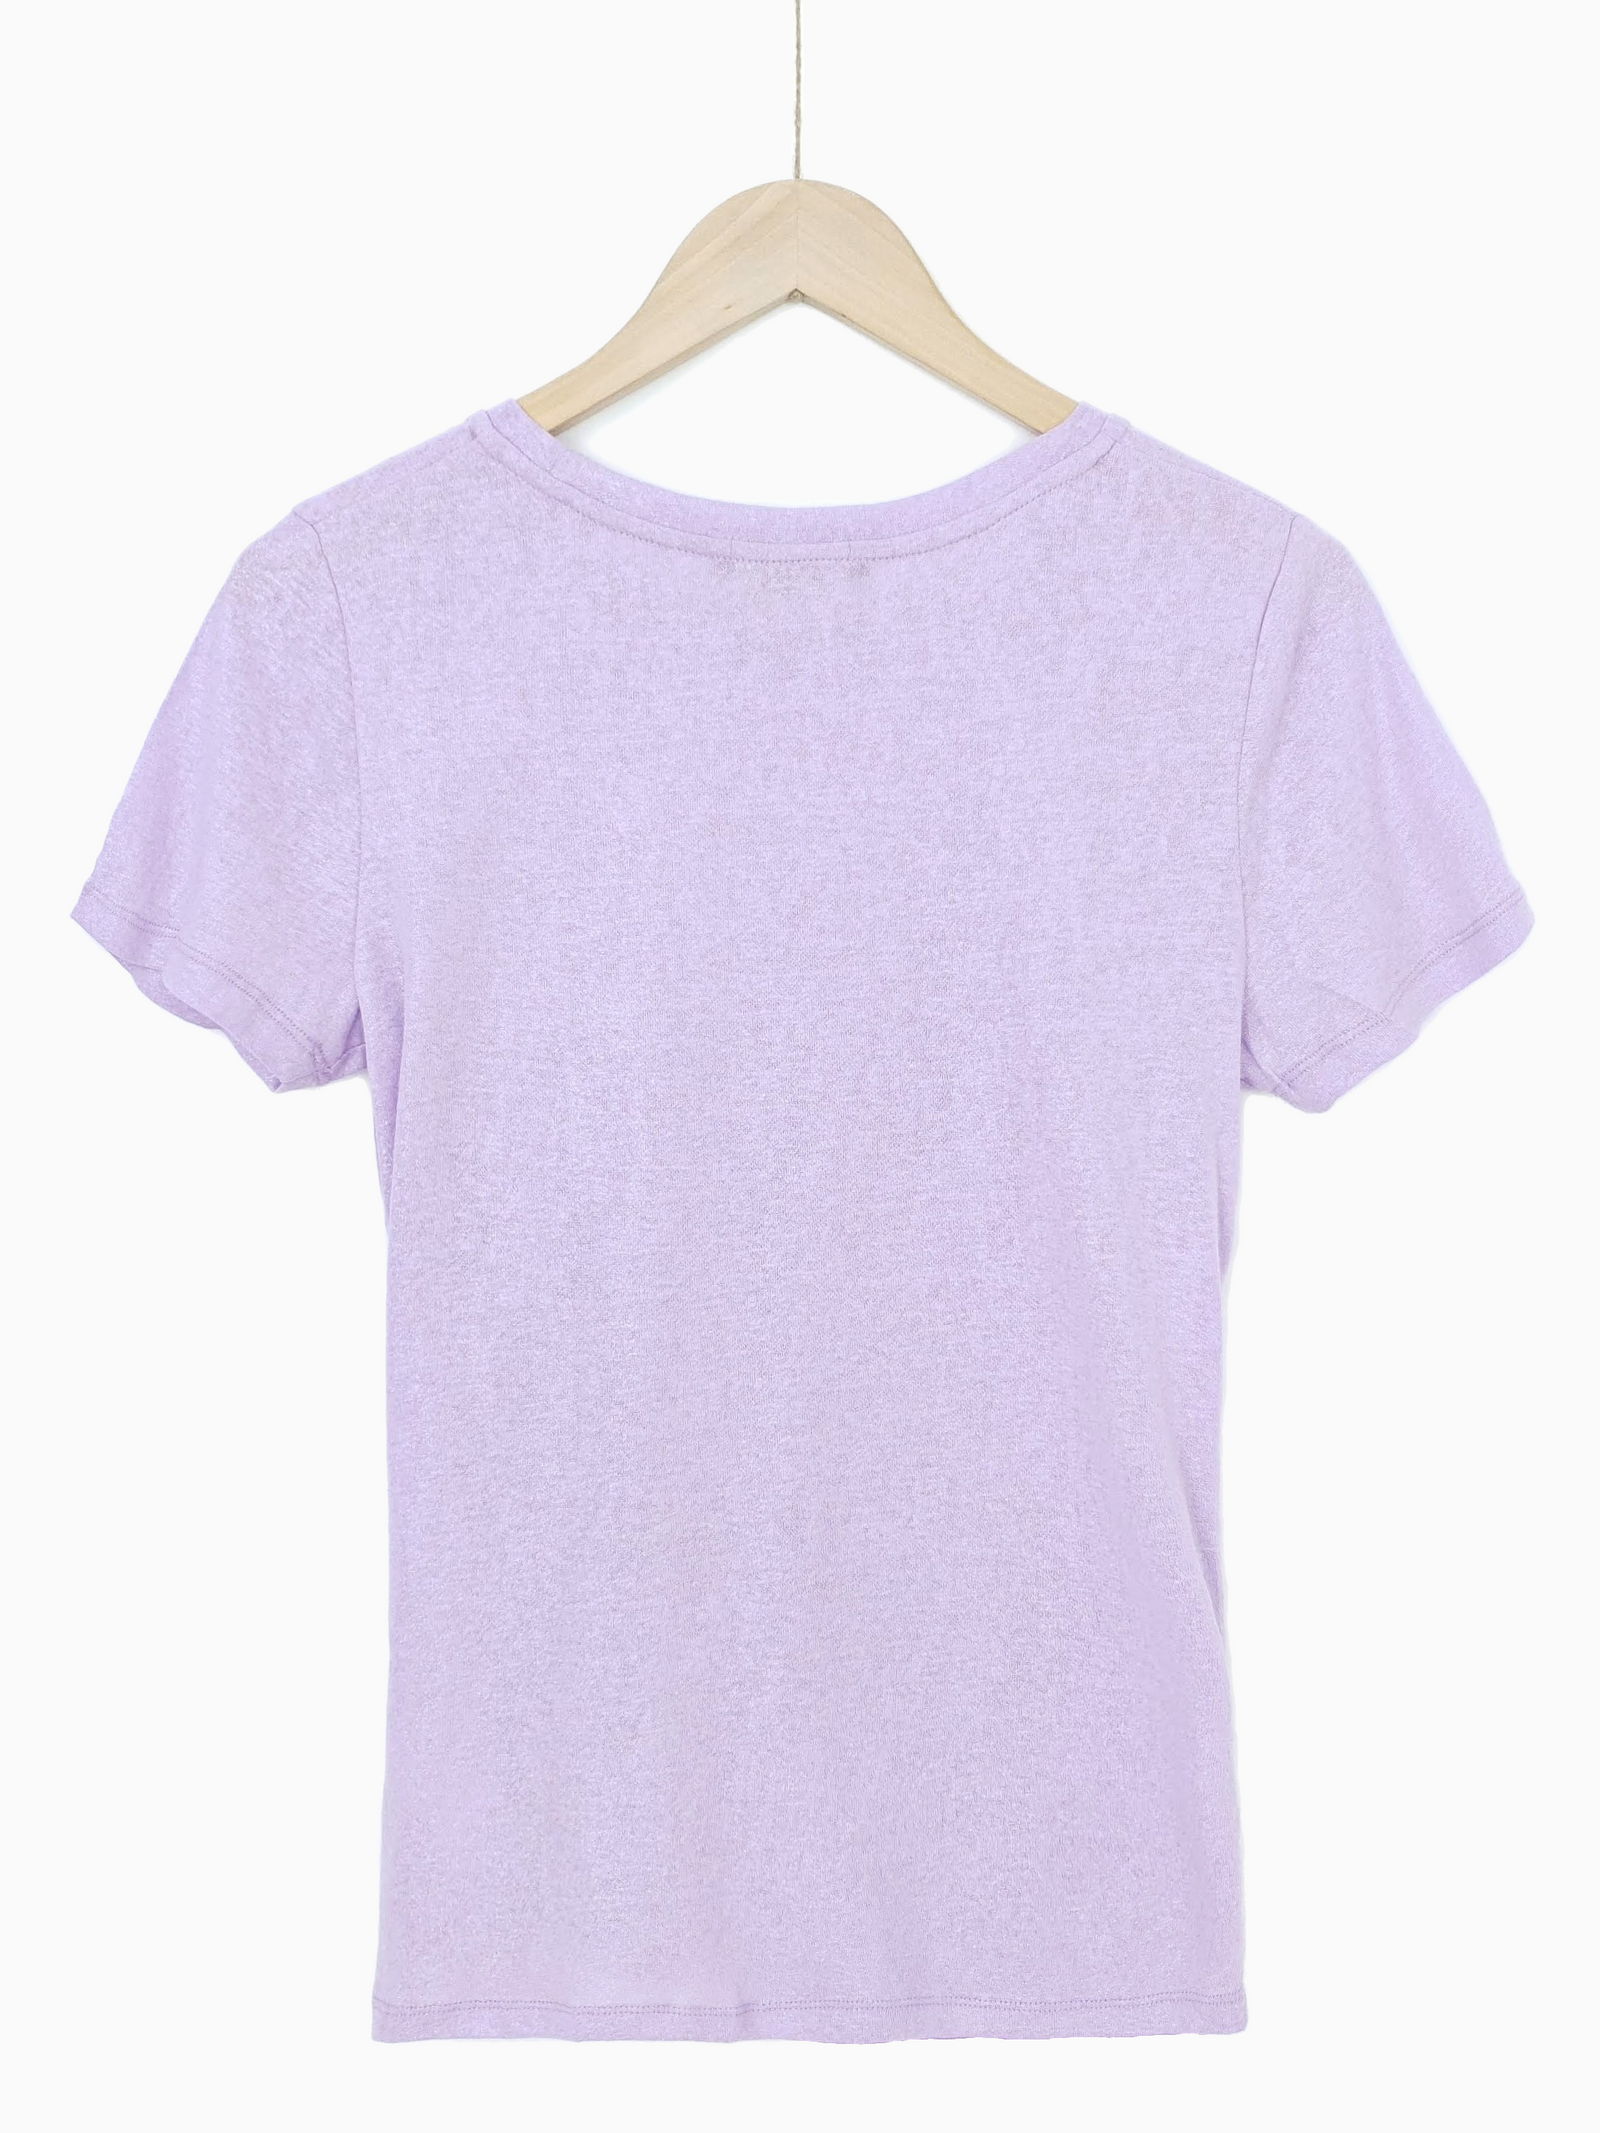 JOLIE | Knotted Front Top | Lilac